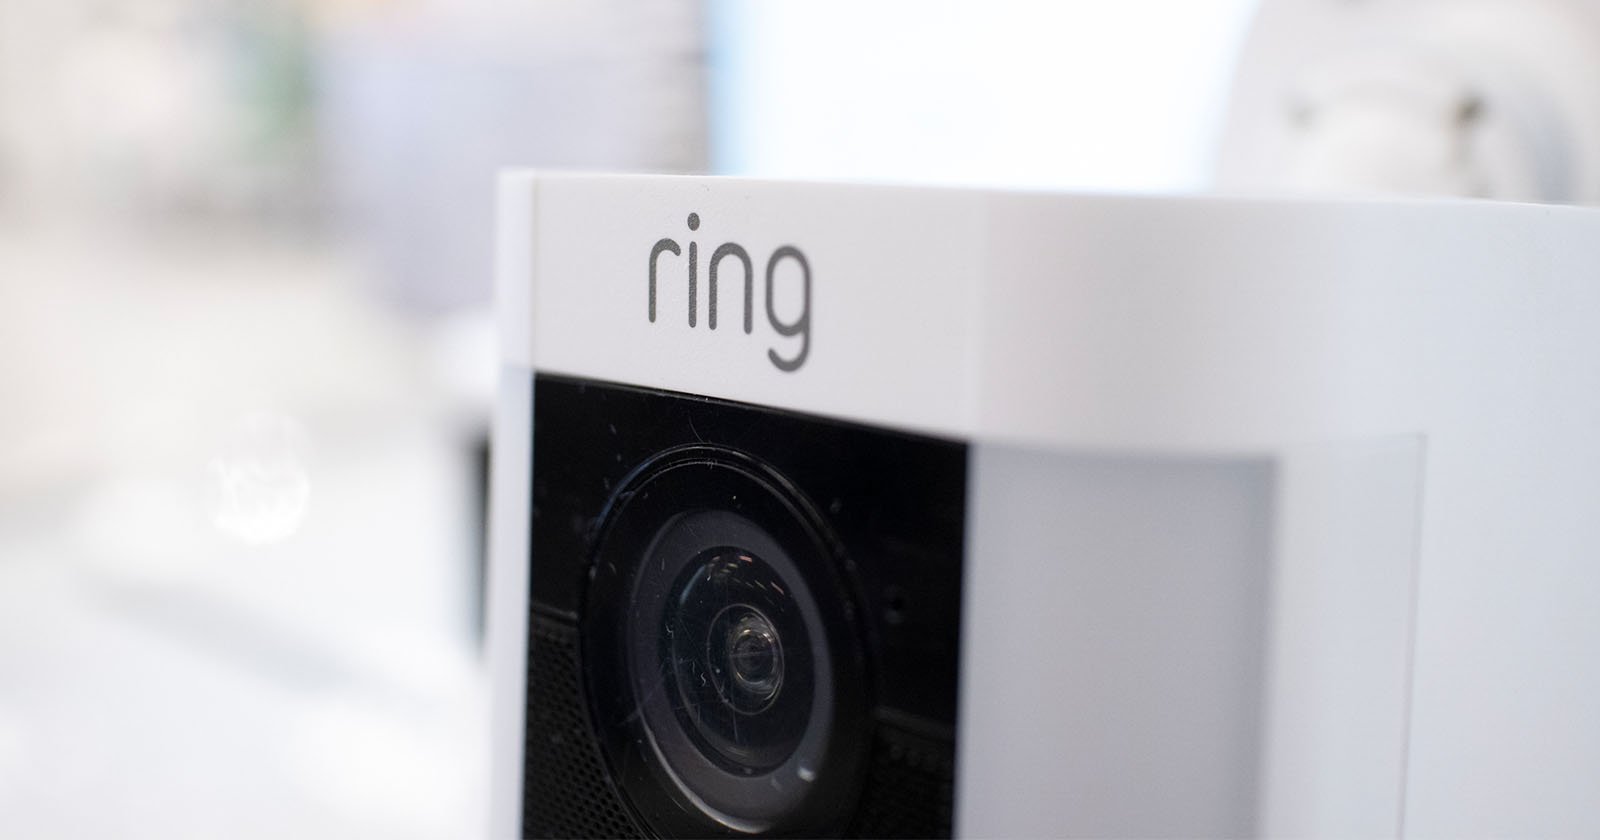 Amazon fixes Ring Android app flaw exposing camera recordings